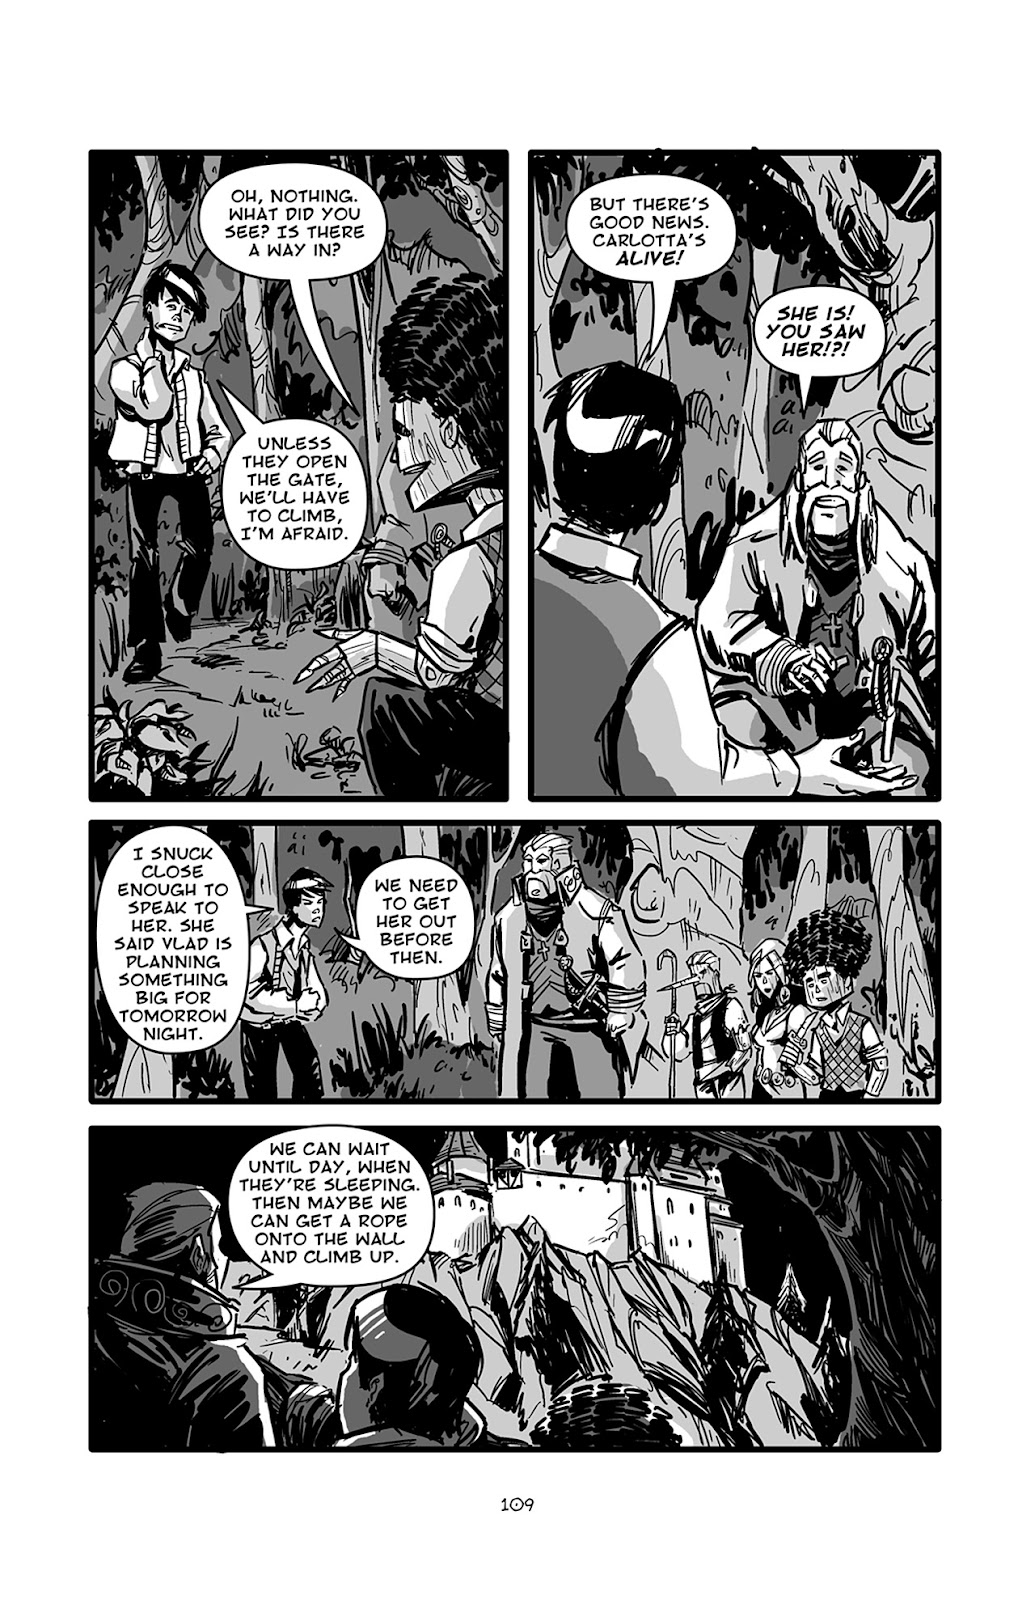 Pinocchio: Vampire Slayer - Of Wood and Blood issue 5 - Page 10